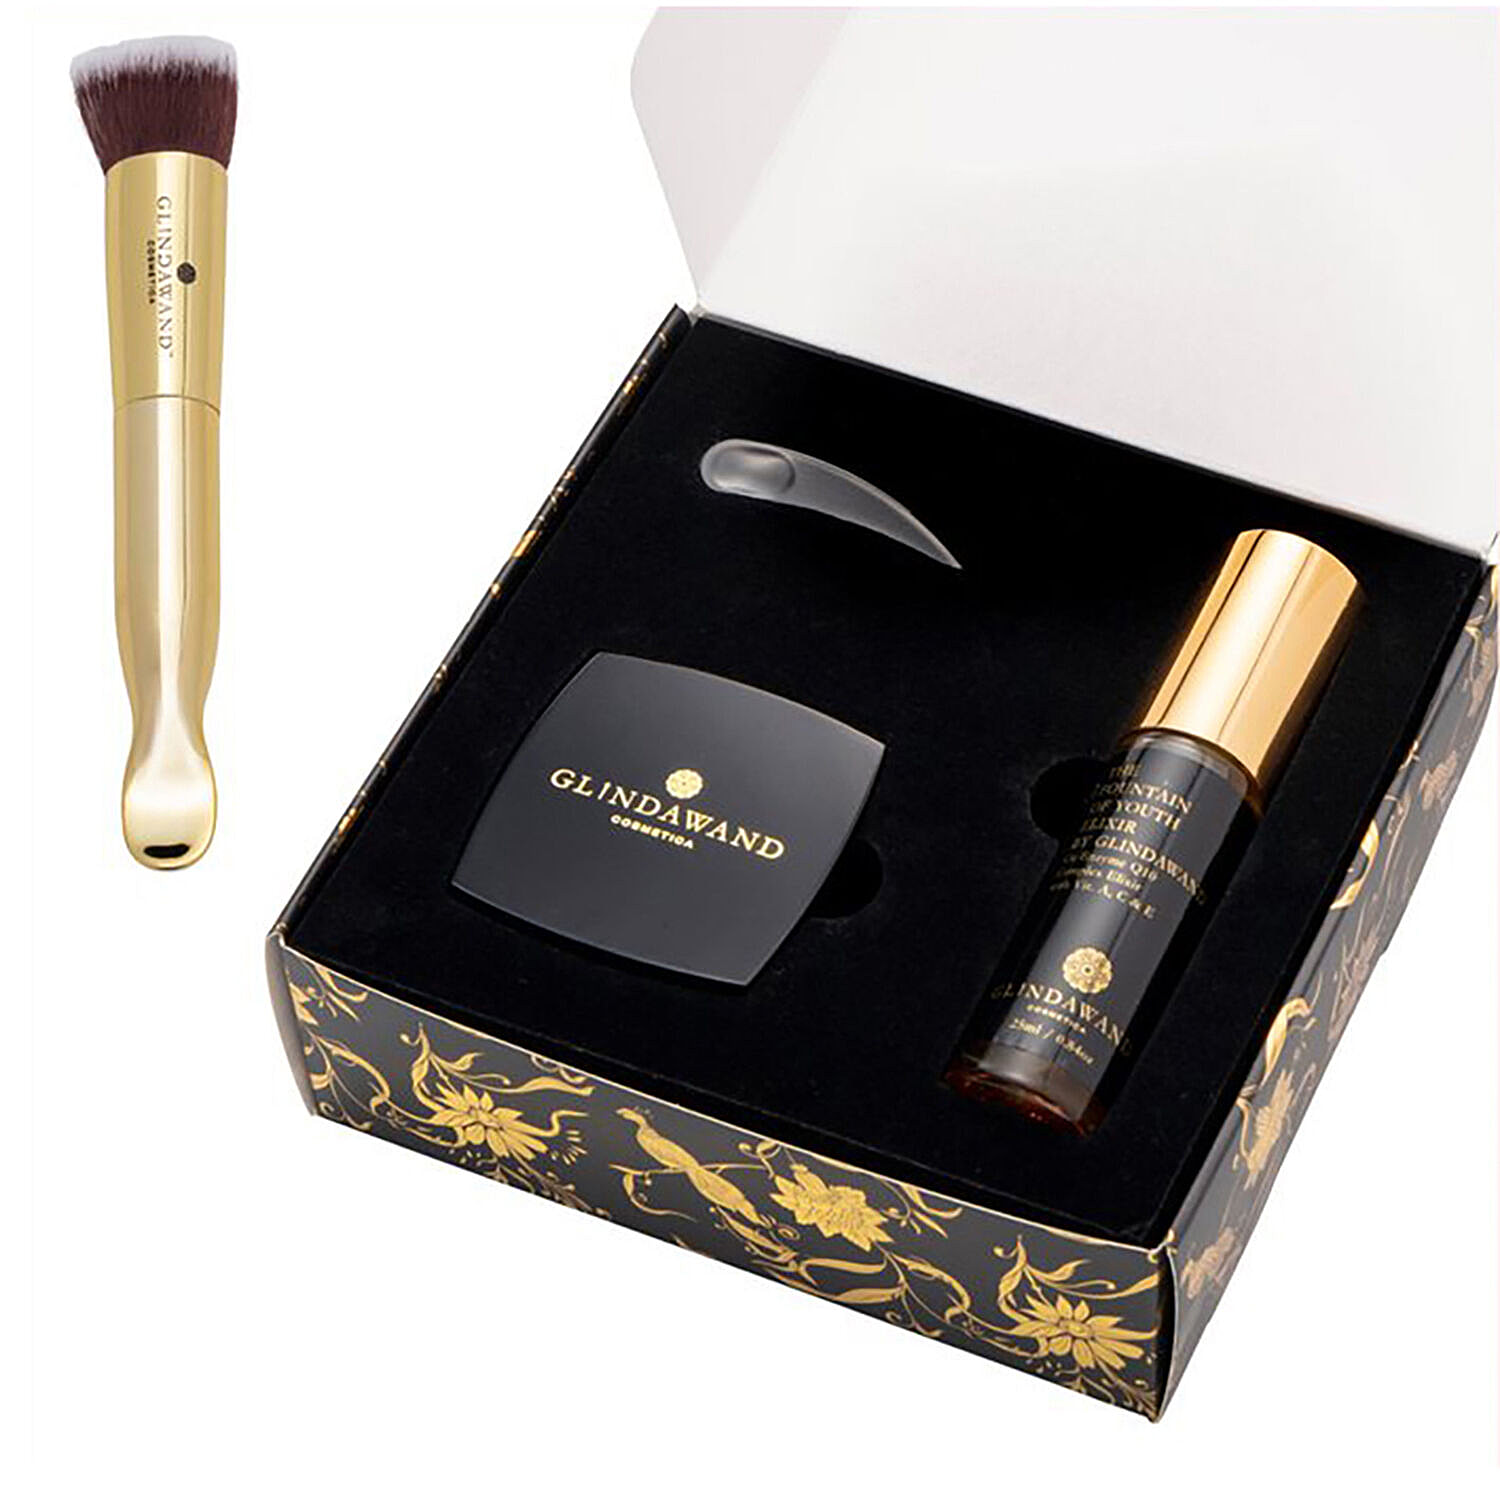 Glindawand: Duo Gift Box (Incl. Fountain of Youth Elixir - 25ml and Divinity Foundation) - Almond (With Free Fibre Brush with Spoon)